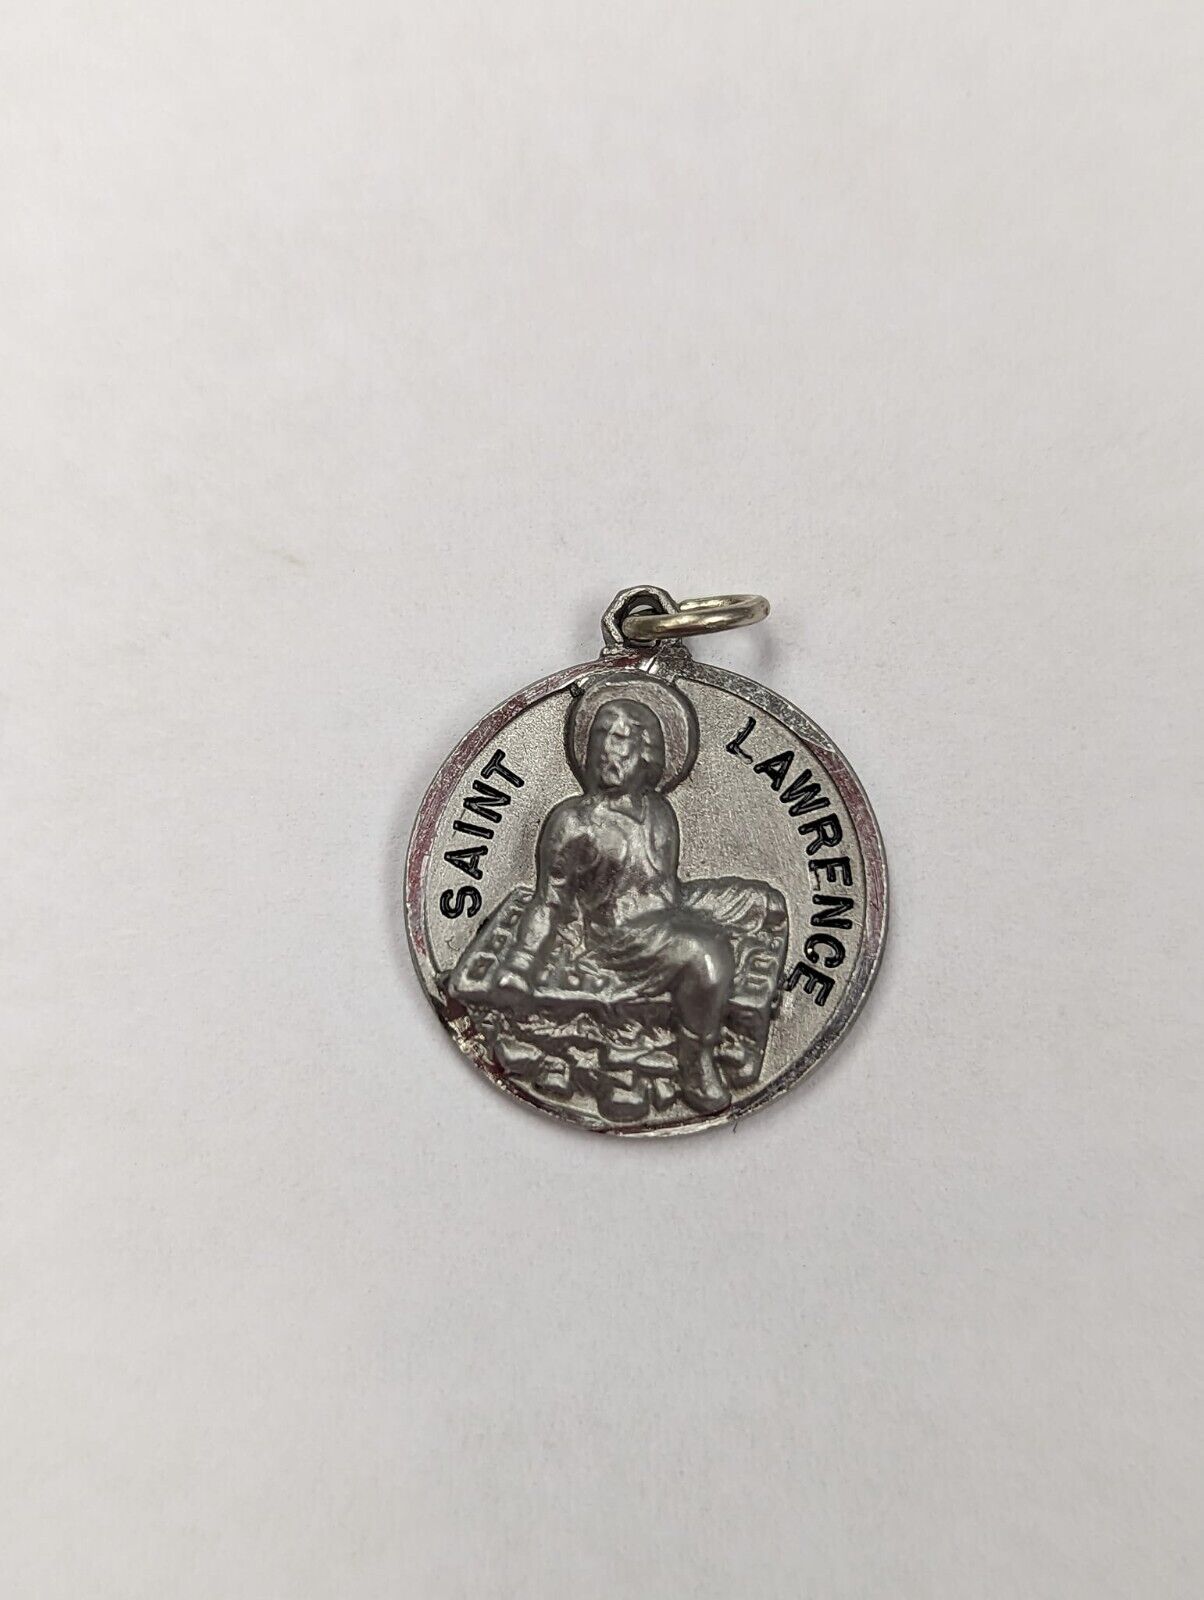 ROUND Creed Saint St Lawrence SILVERTONE Medal 7/8 Inch